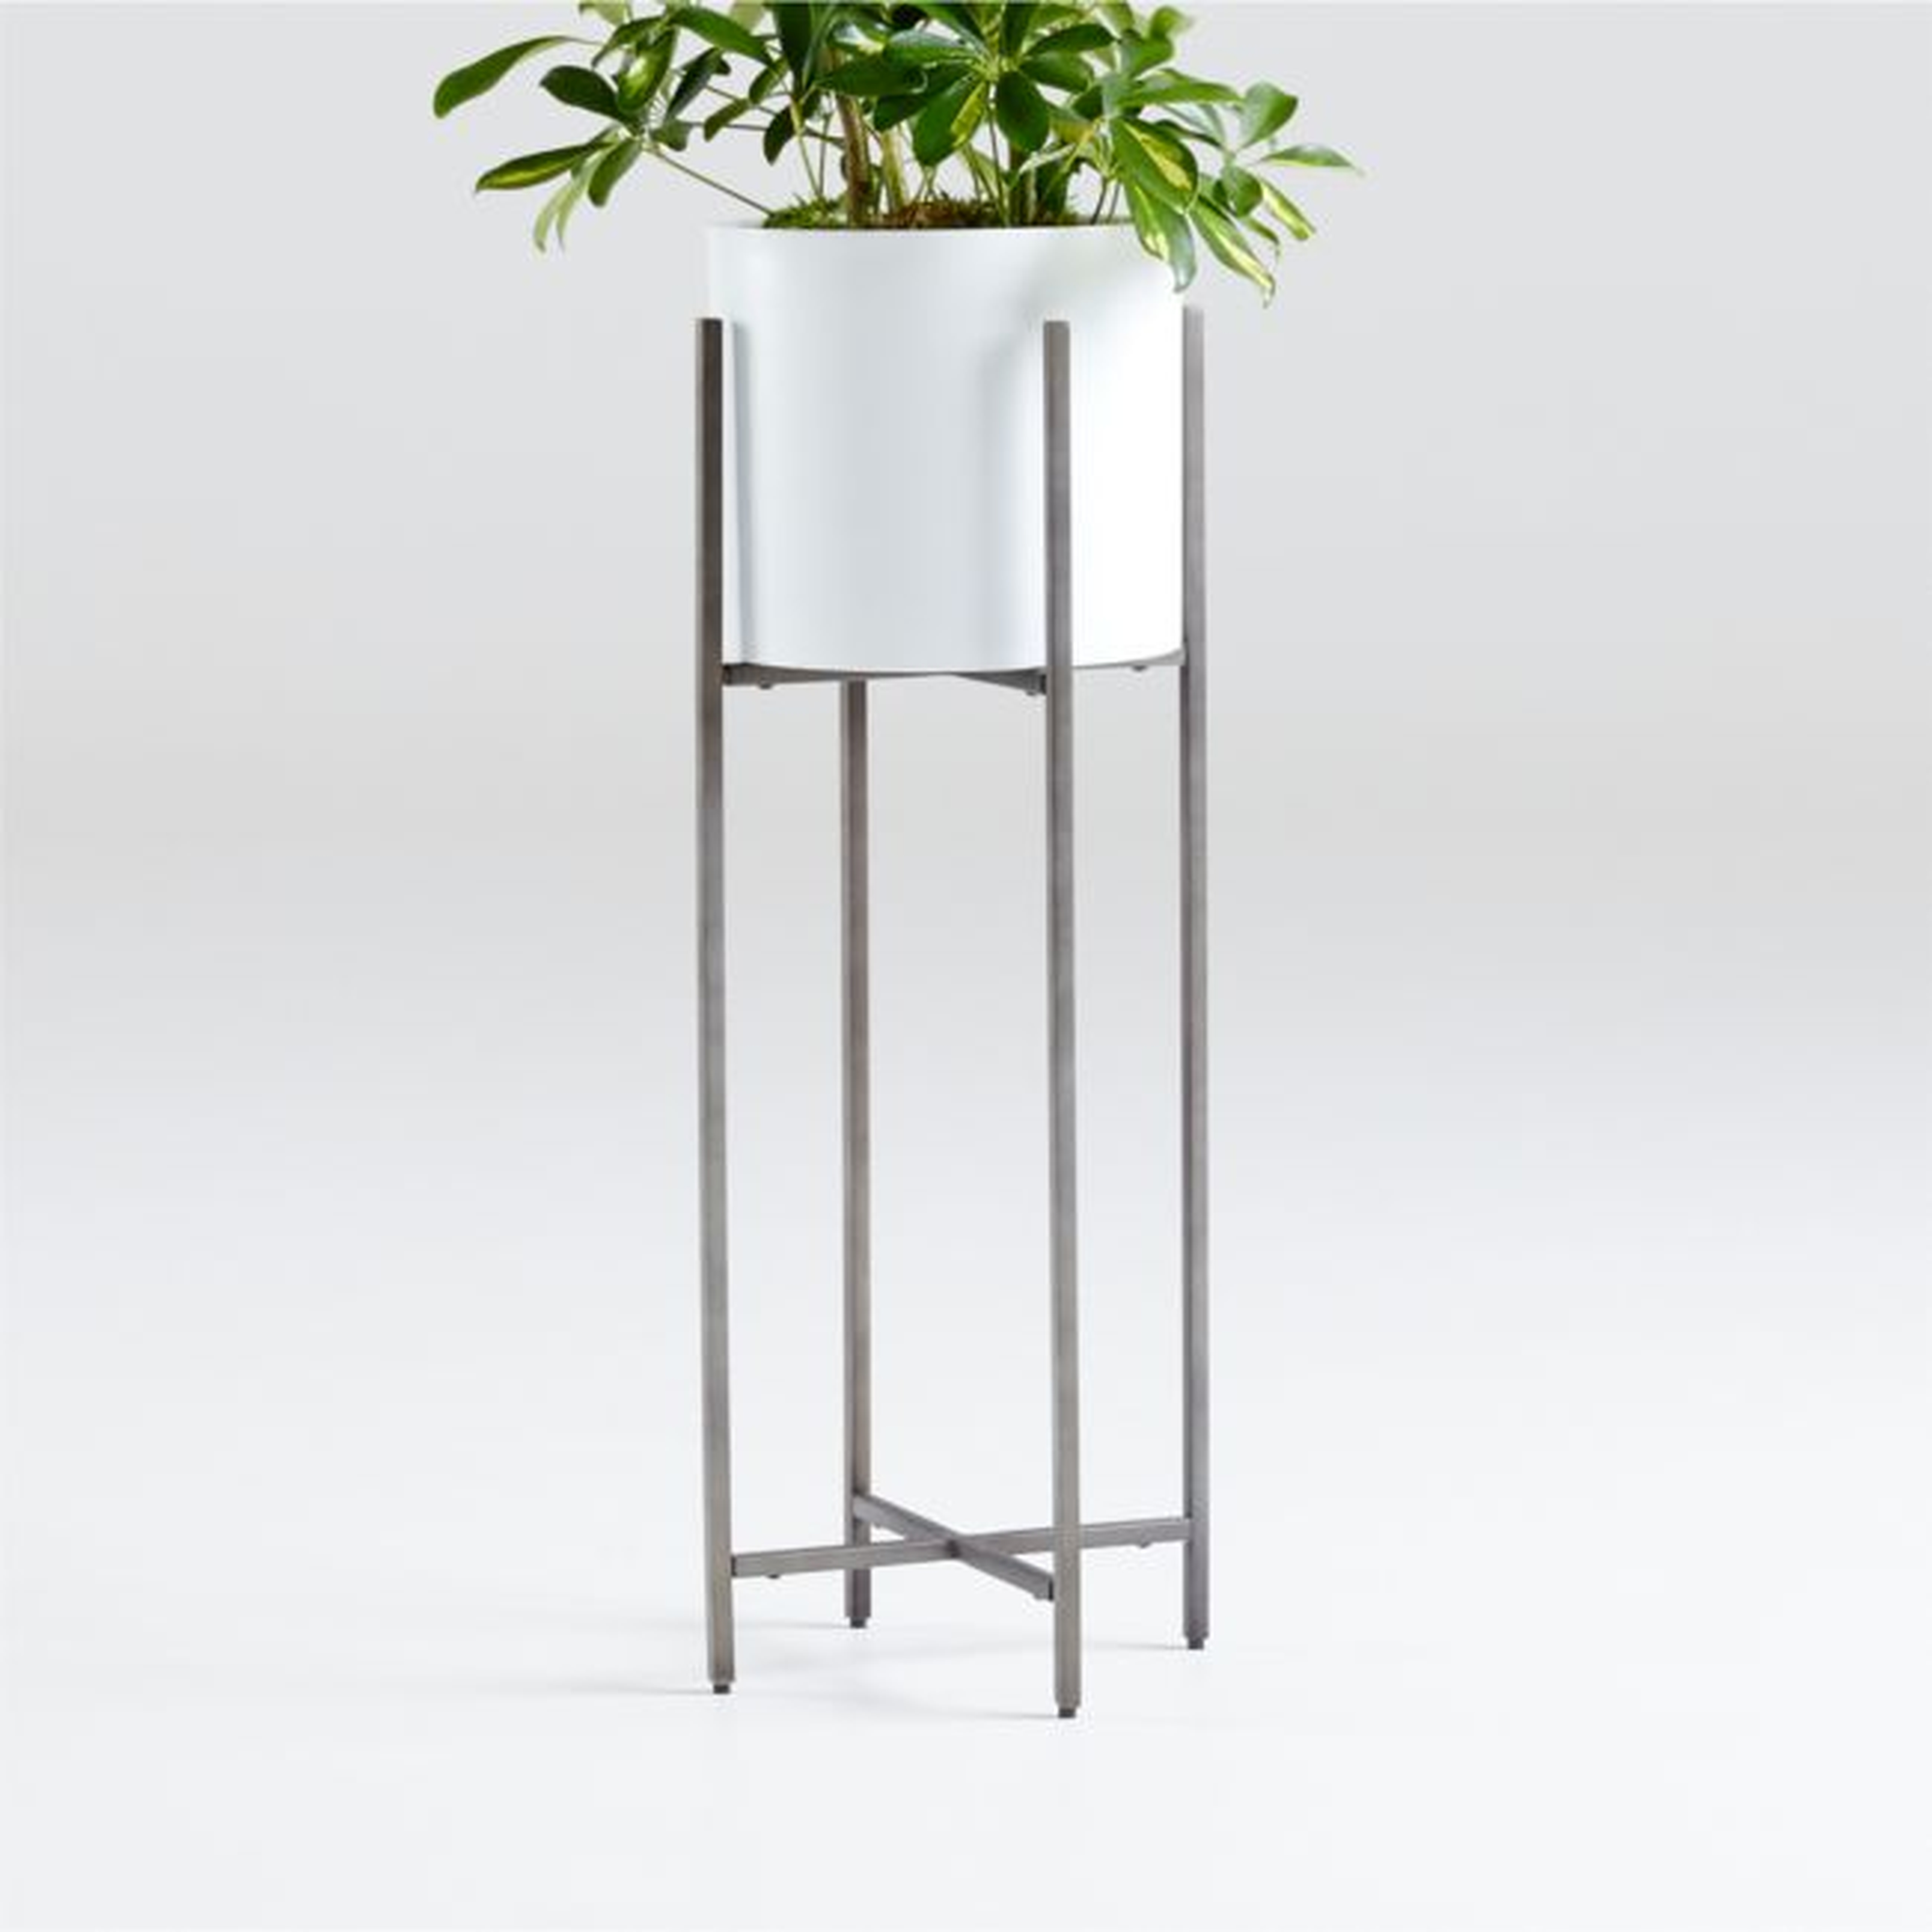 Dundee White Round Indoor/Outdoor Planter with Tall Stand - Crate and Barrel